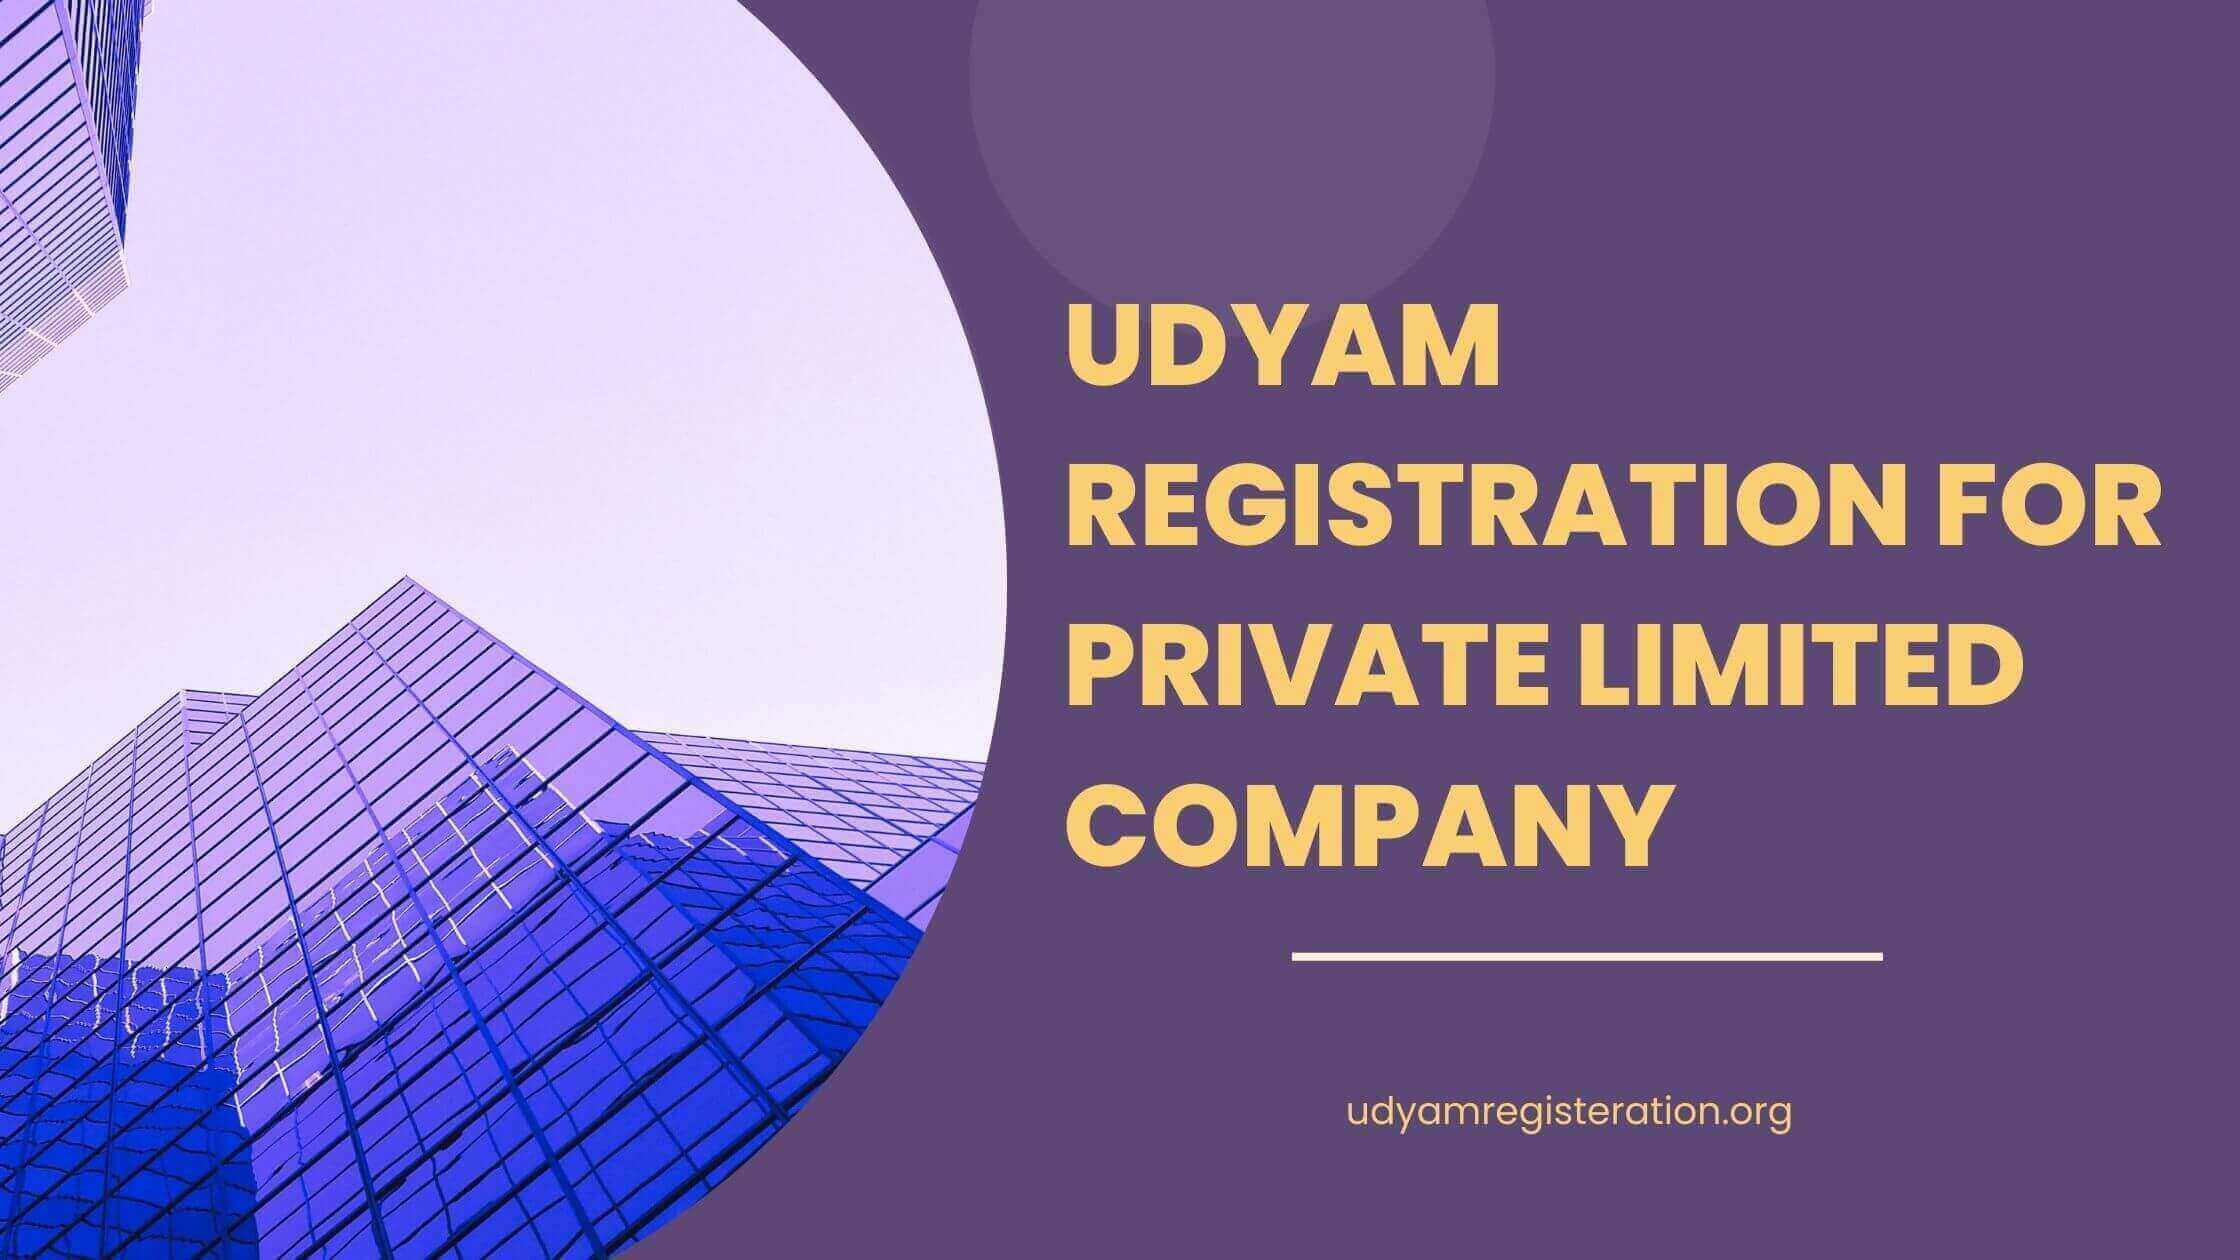 Udyam registration for Private Limited Company